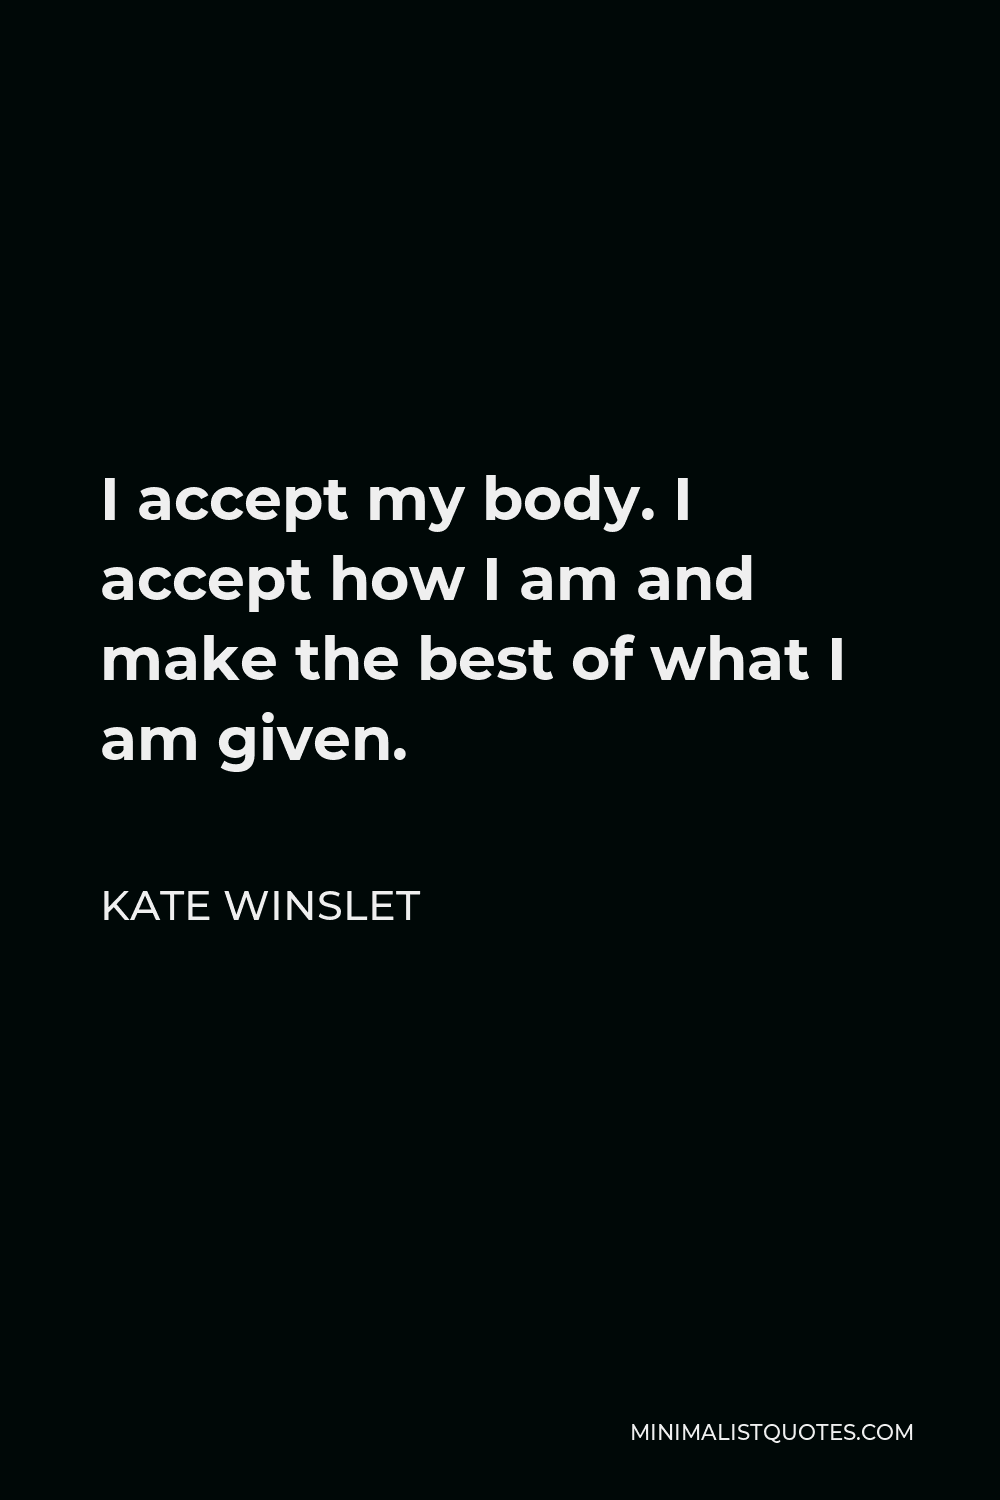 Kate Winslet Quote - I accept my body. I accept how I am and make the best of what I am given.